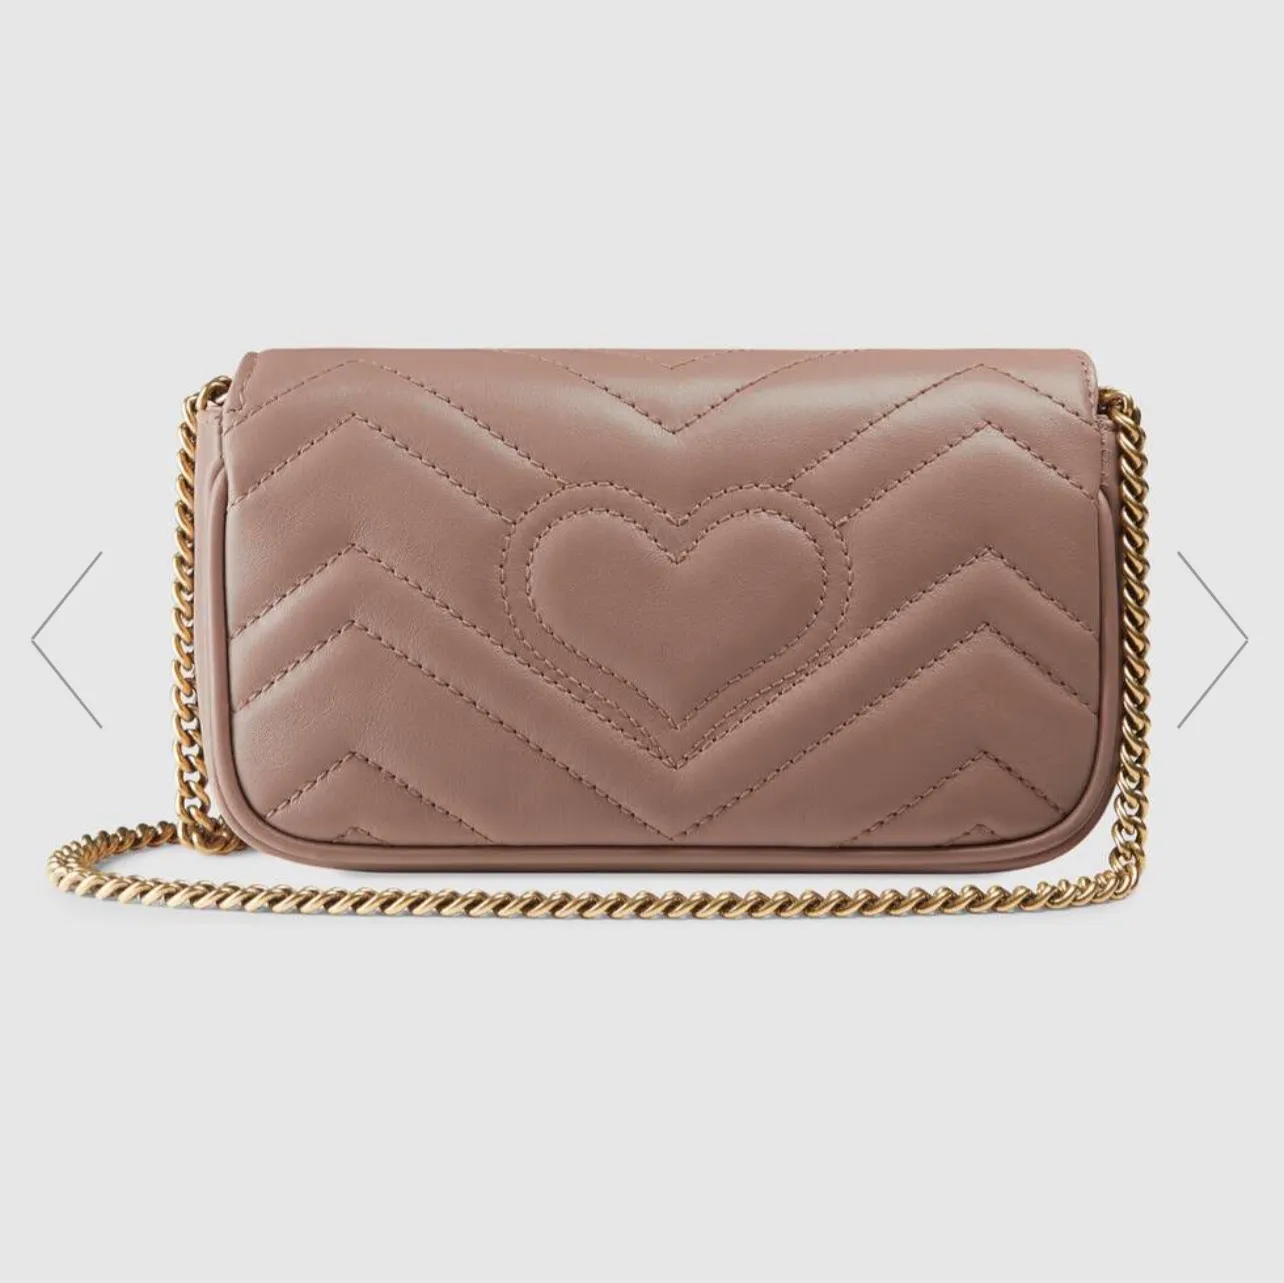 Marmont Chevron Leather Super Mini Bag Key Ring Inside Attachable to Big Tote Softly Structured Shape Flap Closure with Double Let2533